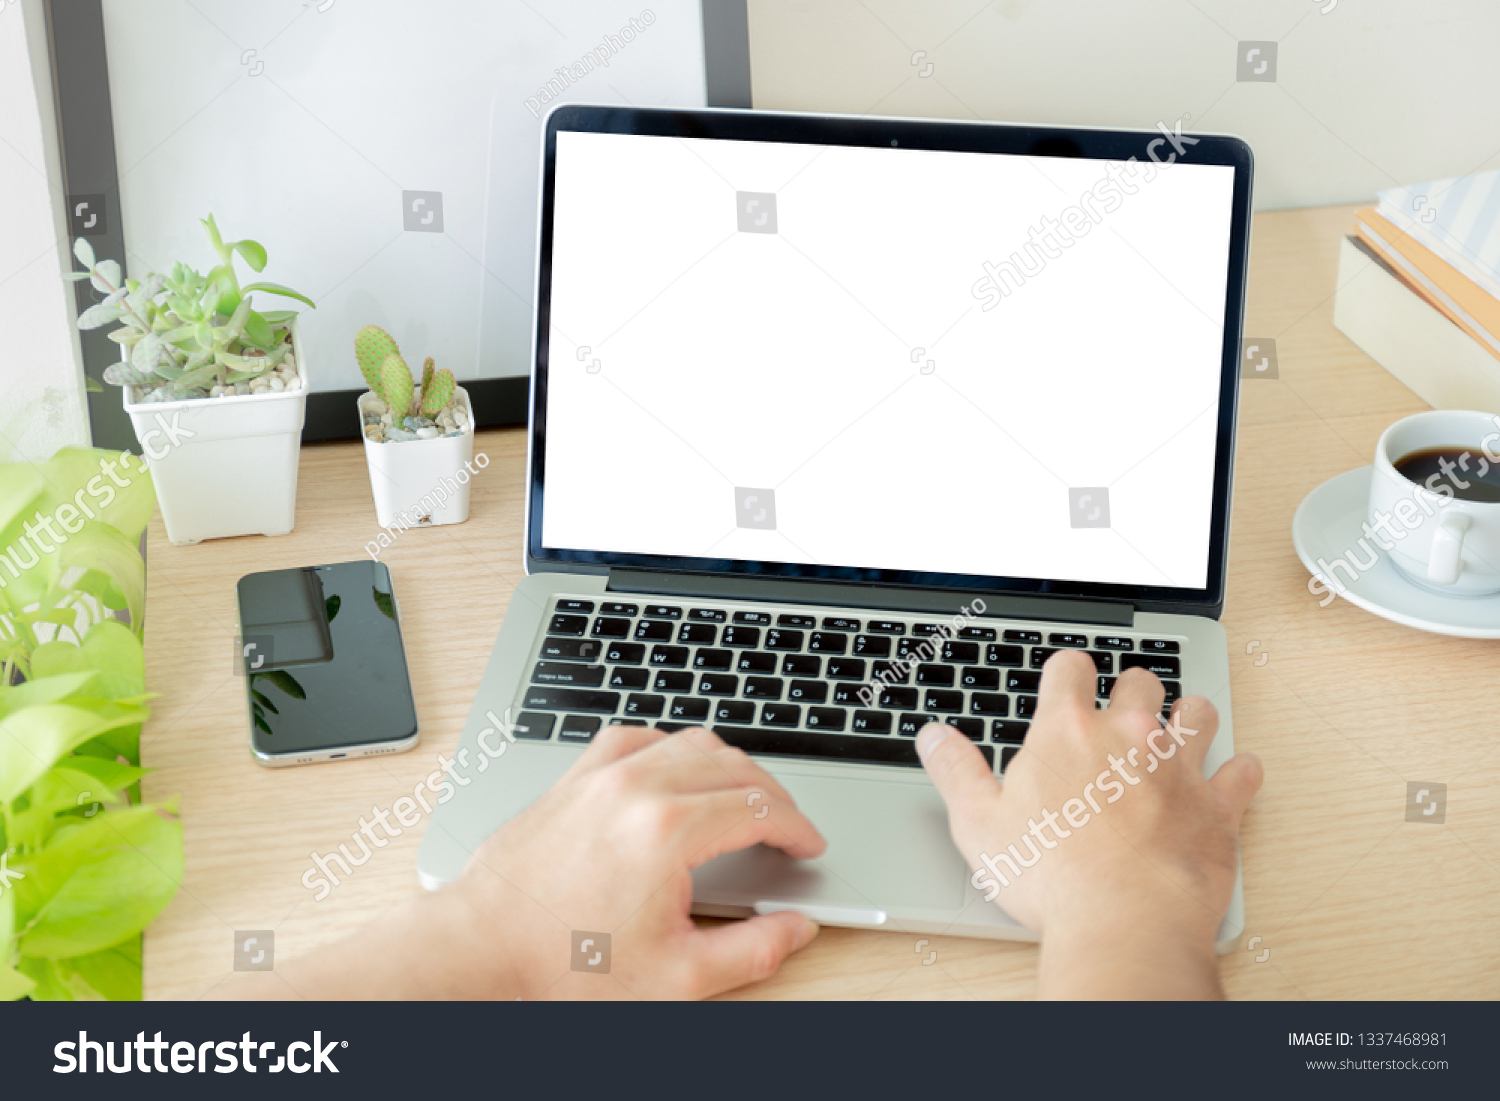 mockup image computer hand typing with blank screen for text,man using laptop contact business and searching information in workplace on desk in office.design creative work space on wooden desktop #1337468981